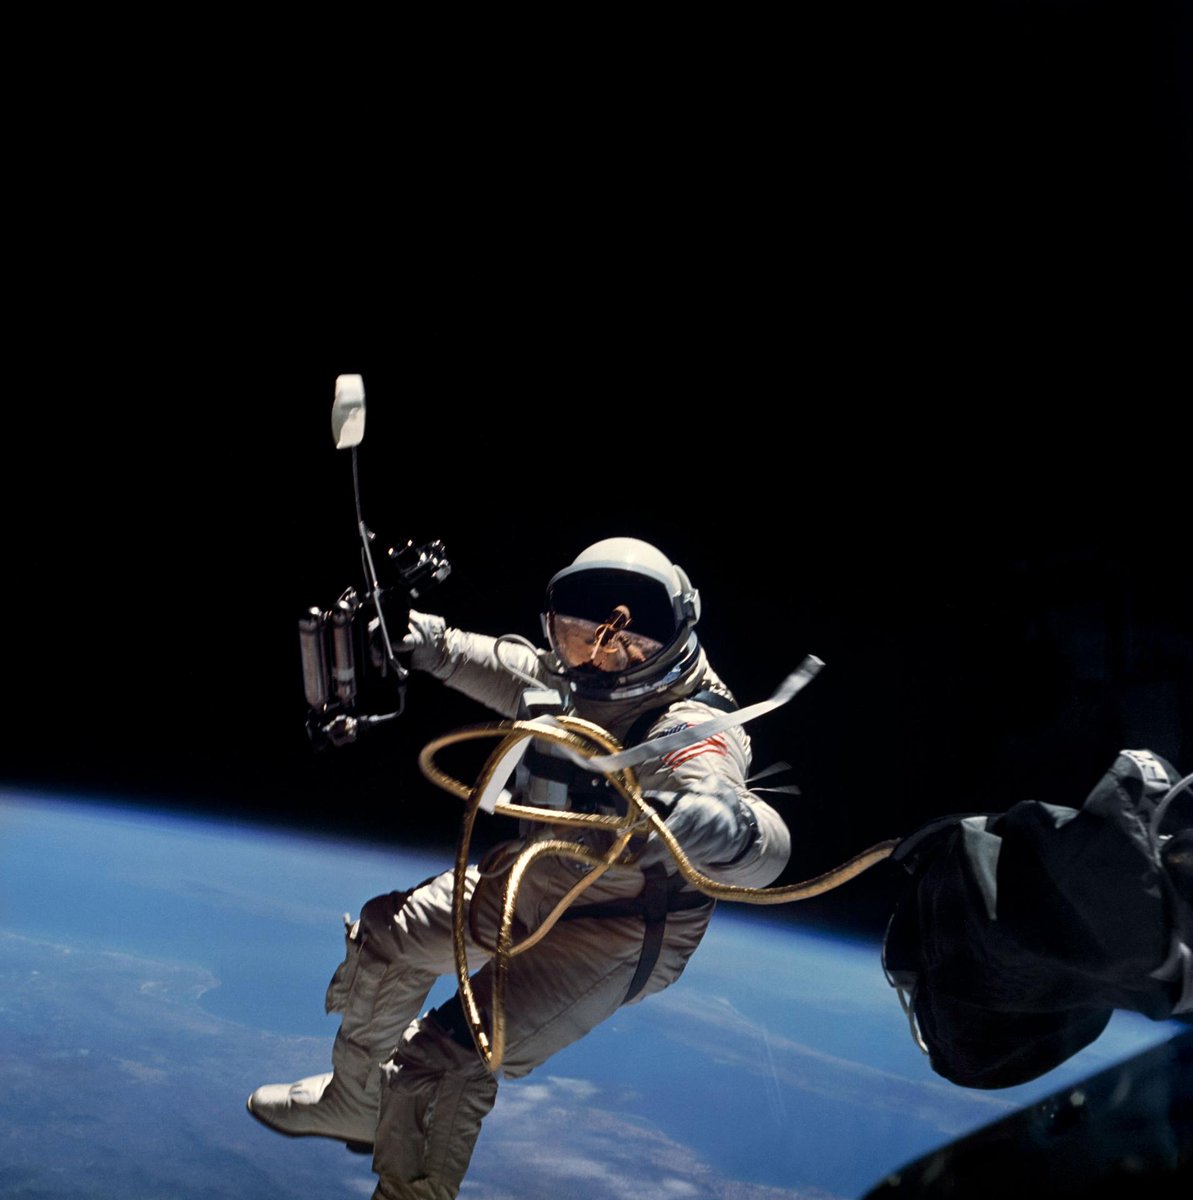 “I'm coming back in... and it's the saddest moment of my life.' That's what Ed White said after completing the first American spacewalk on this day in 1965. We've never been on a spacewalk (one can only dream...) but we imagine we might feel the same way.